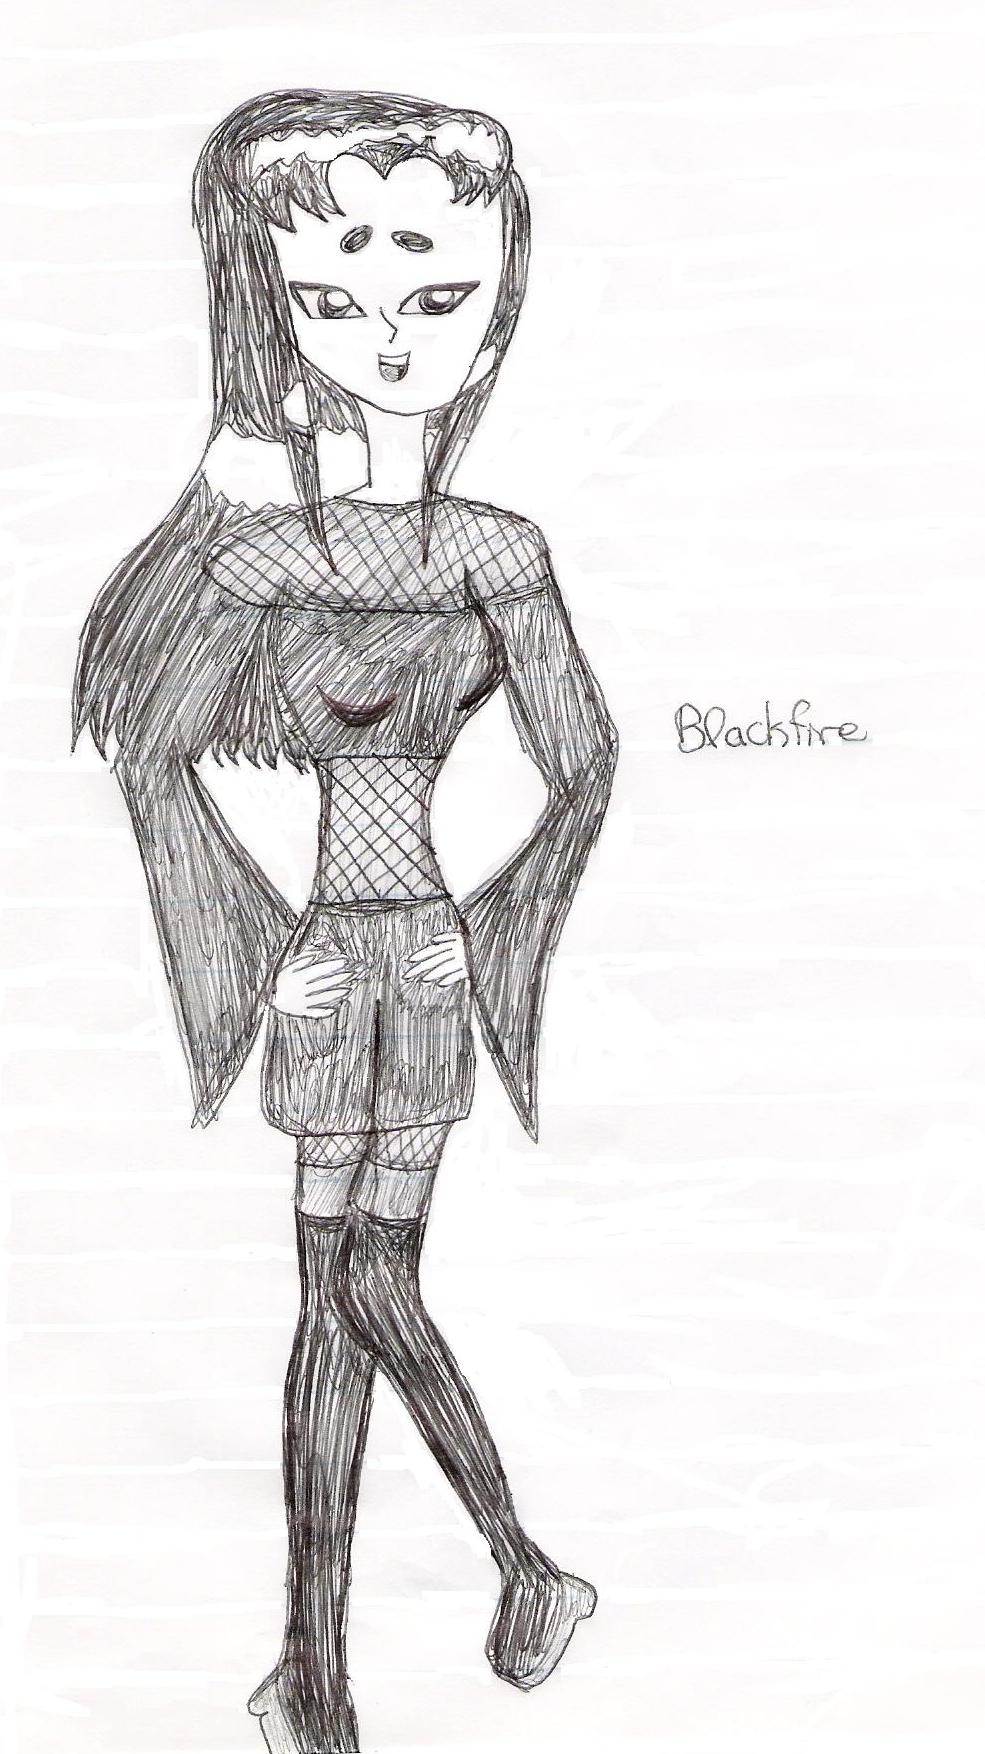 Blackfire has a new fashion statement!(uncolored) by Firey